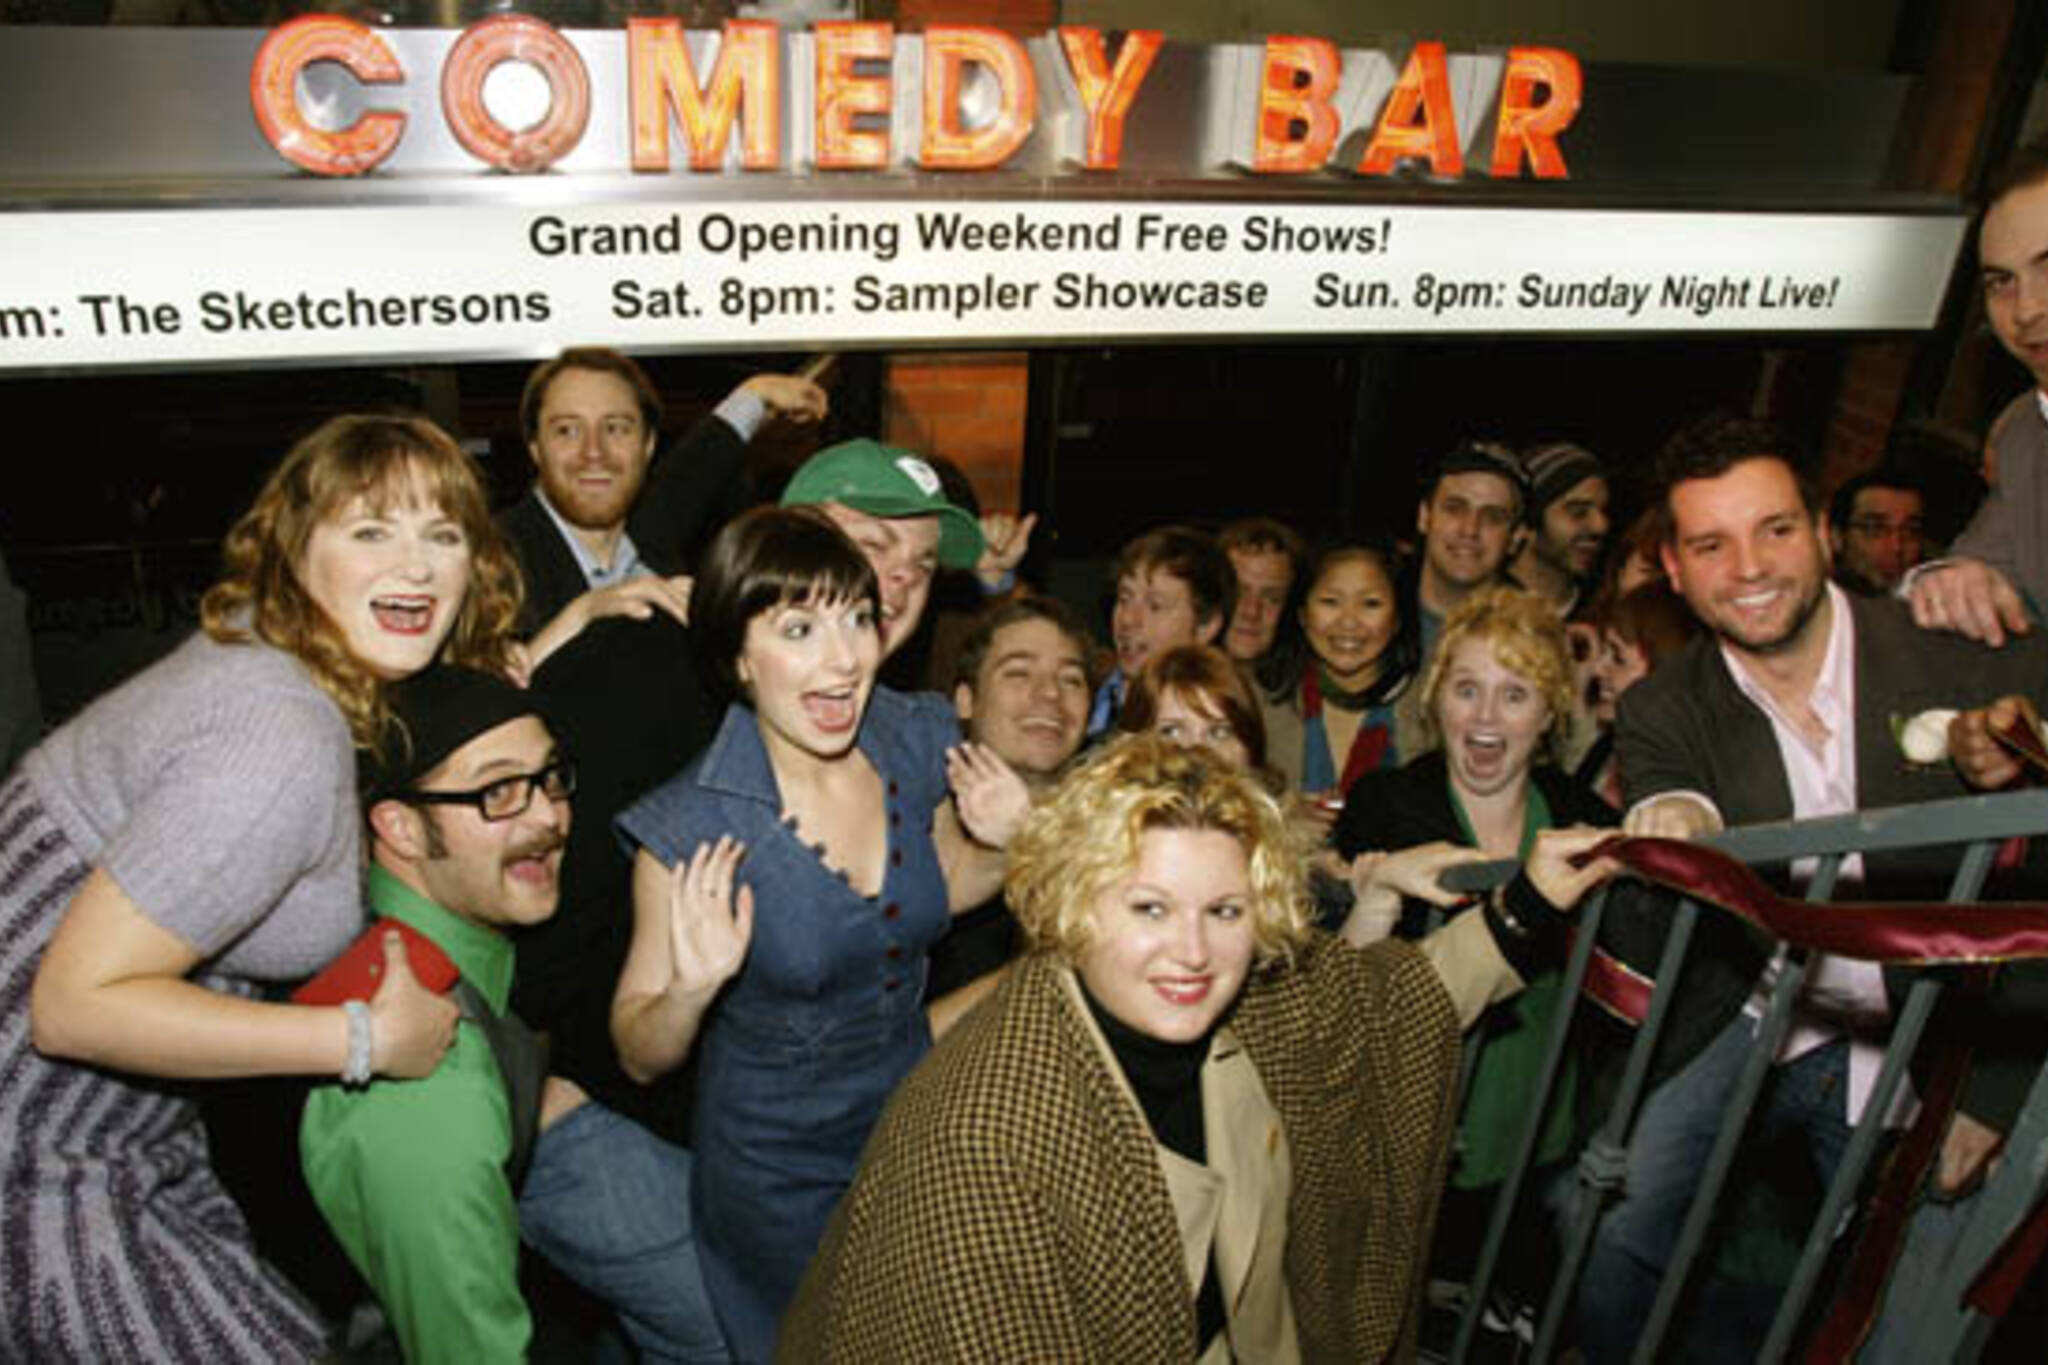 The Comedy Bar's Grand Opening in Toronto